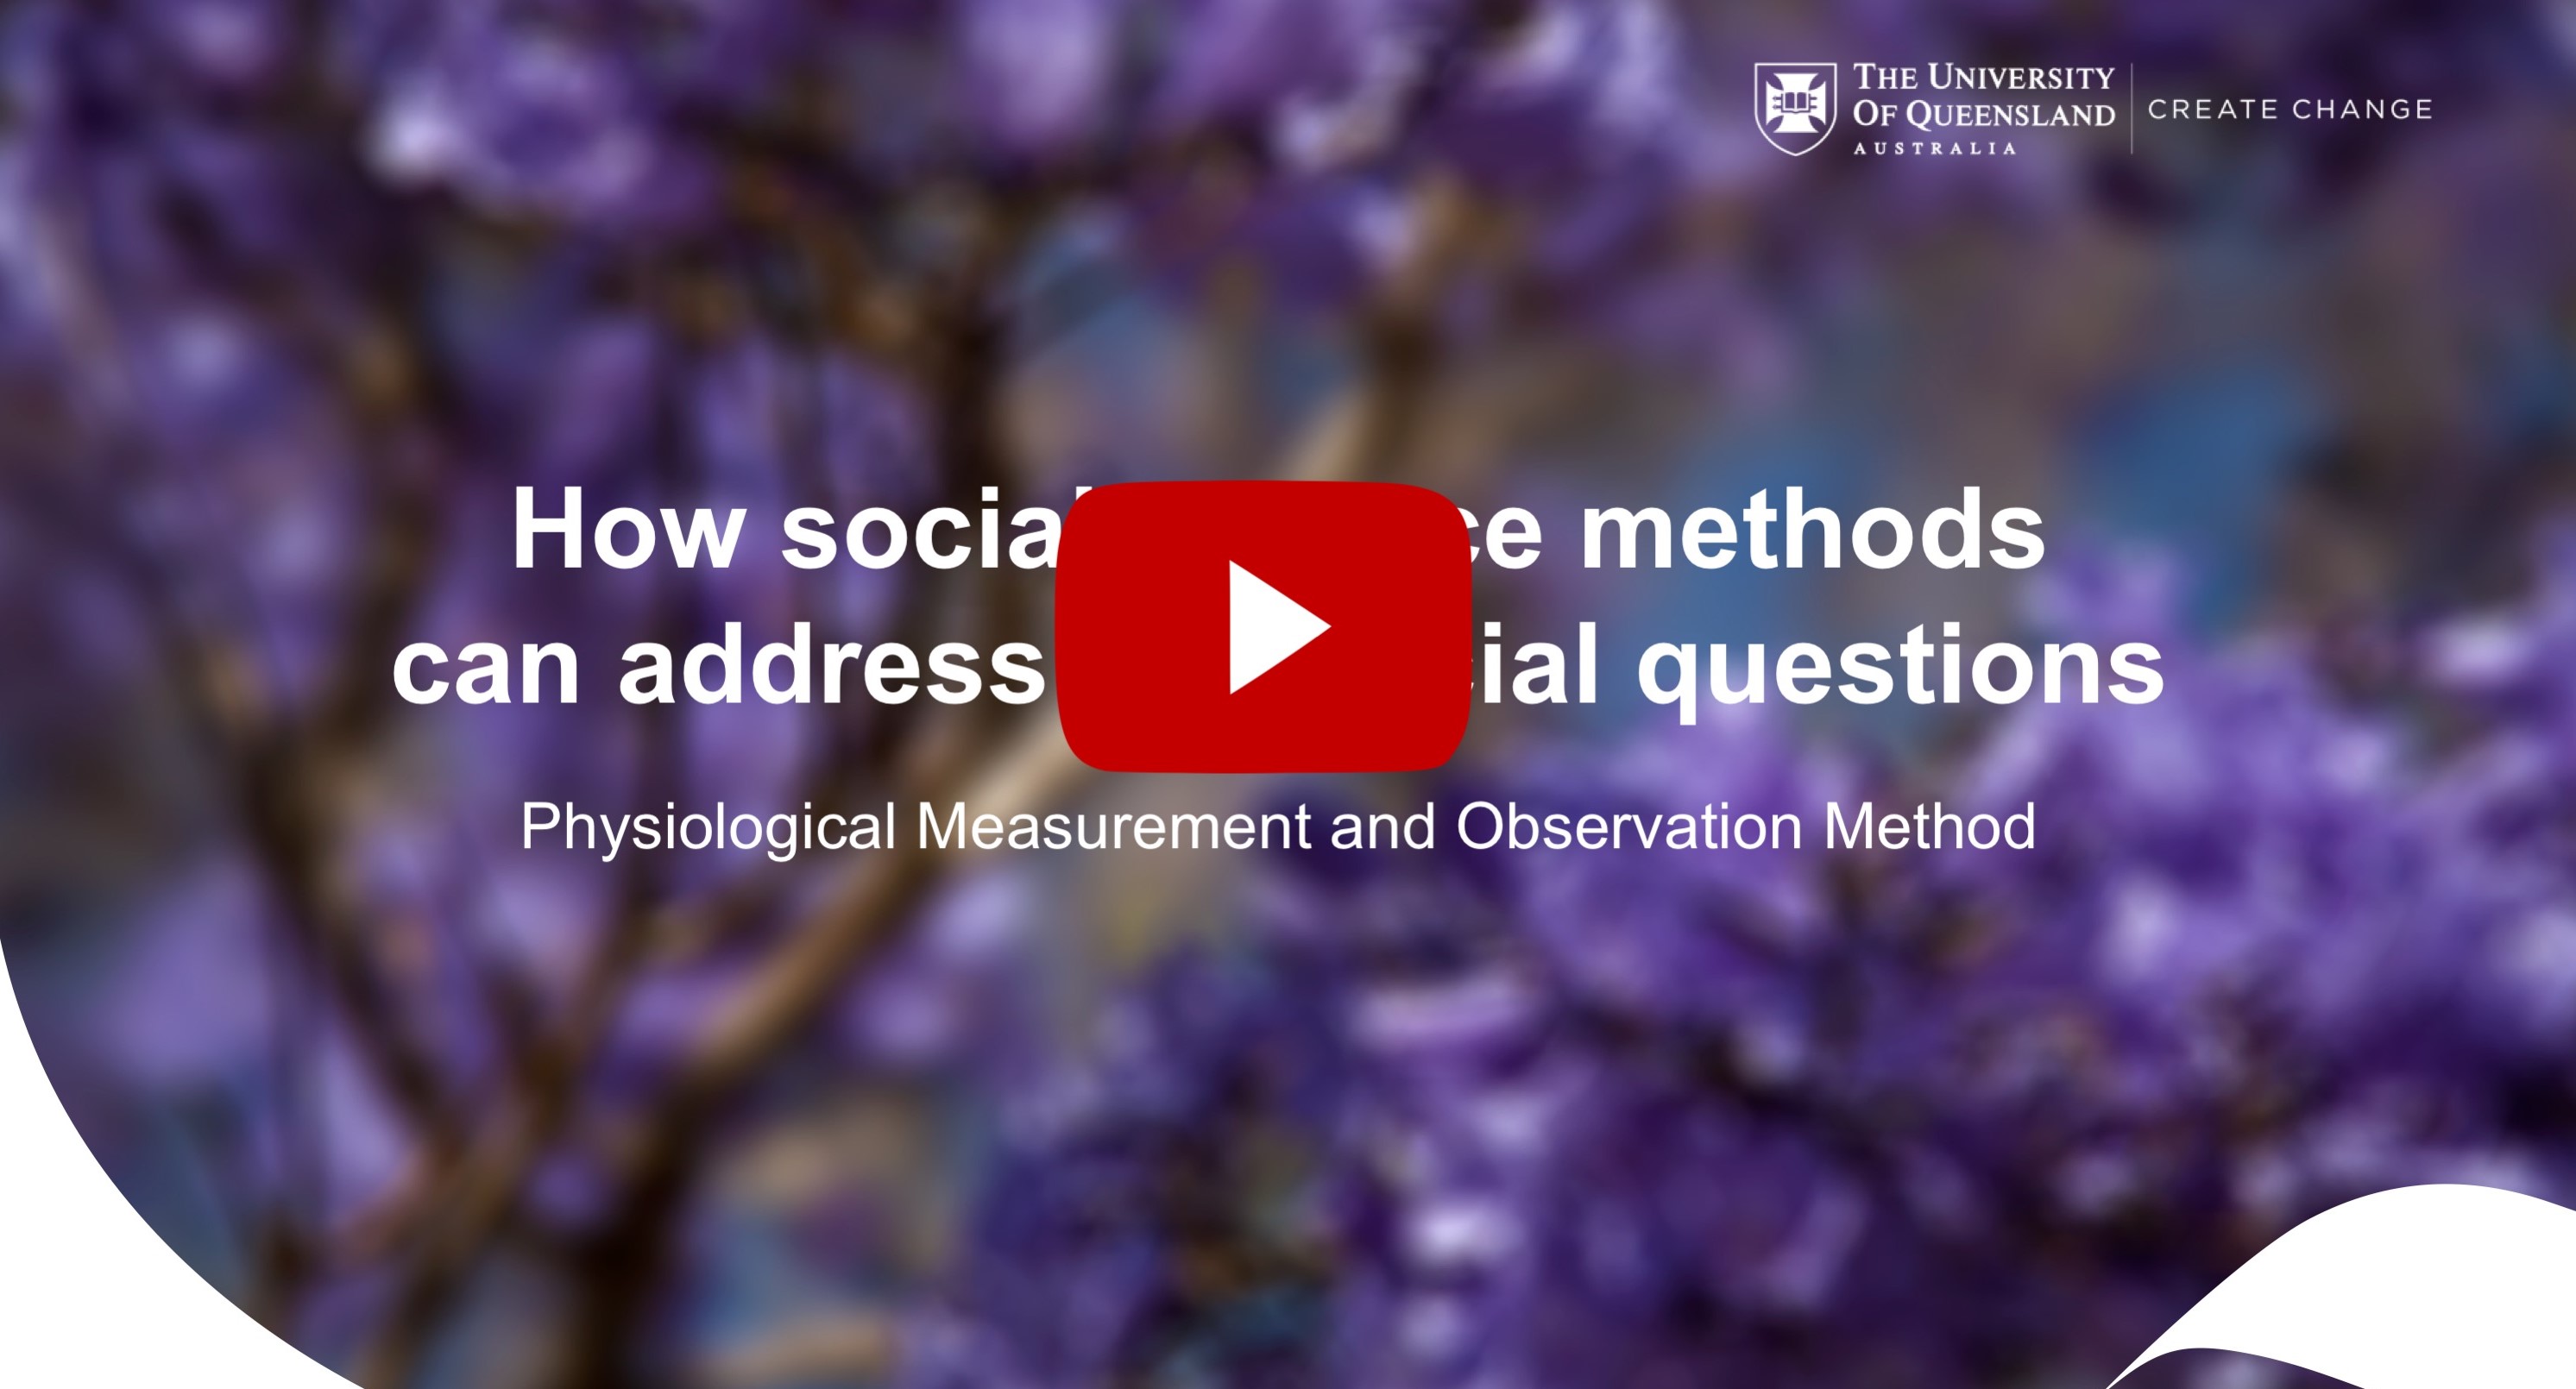 Physicological Measurement and Observation Method